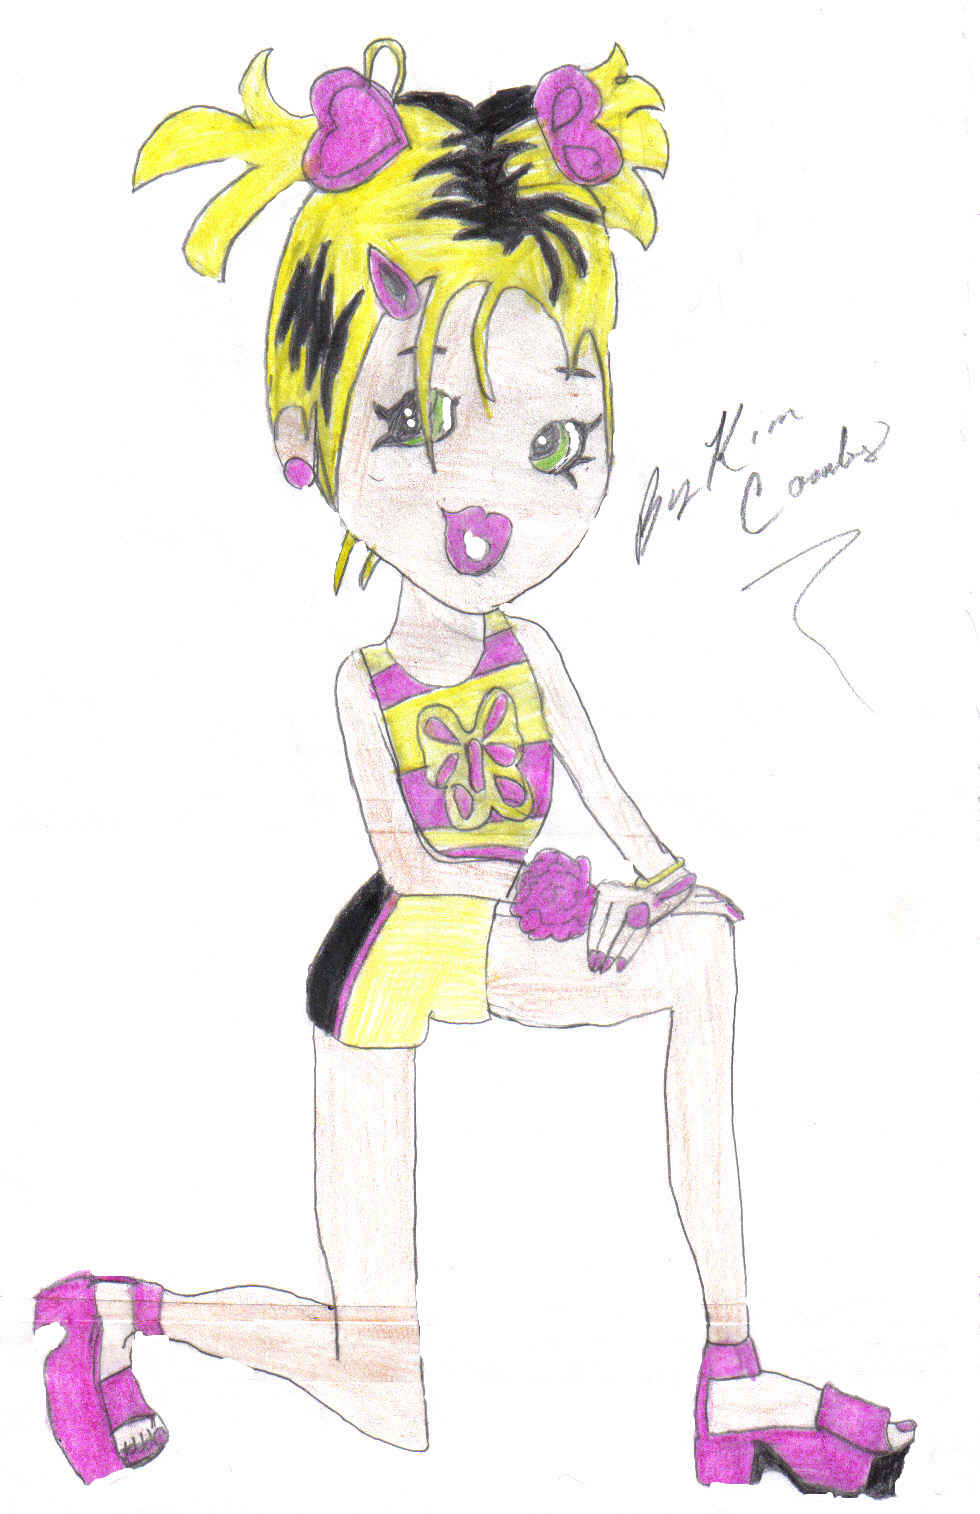 Cheer-pose Chick by tiger_chick91